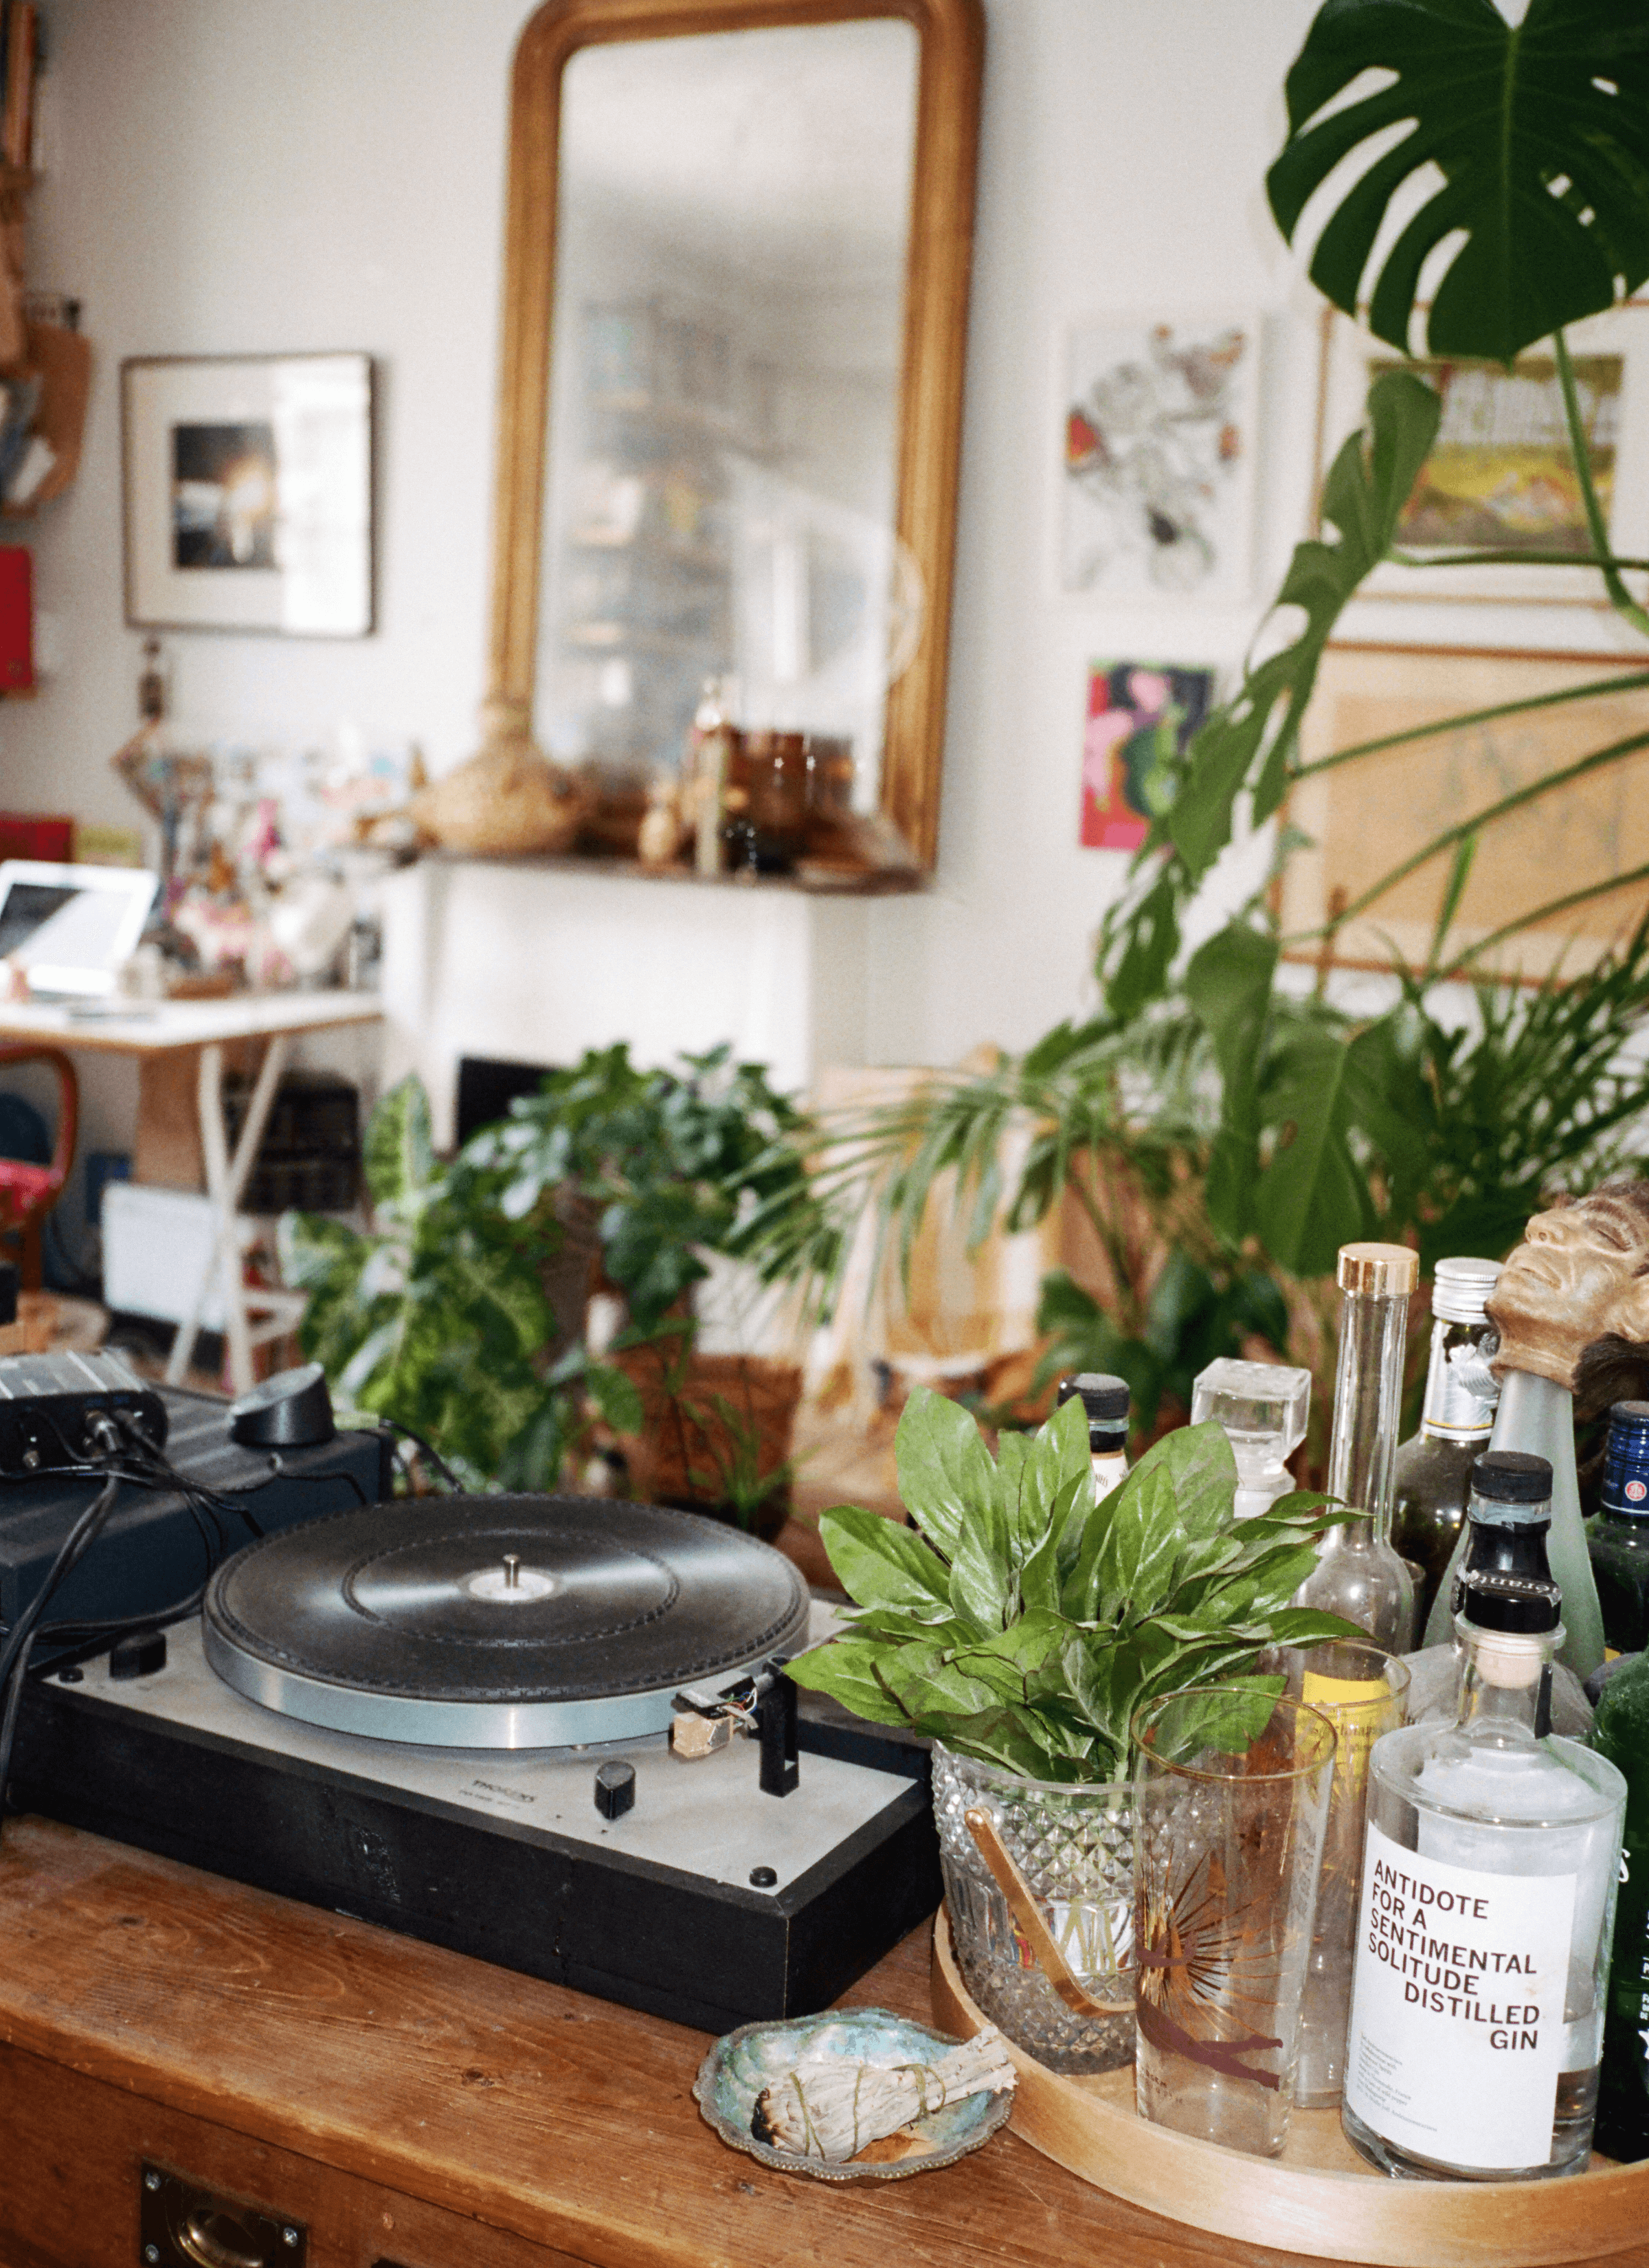 Bottle of alcohol, glasses and a pot of basils on a wooden plate next to a phonograph on the table. There’s a mirror and different pieces of art hung on the wall and lots of decorations in the room.